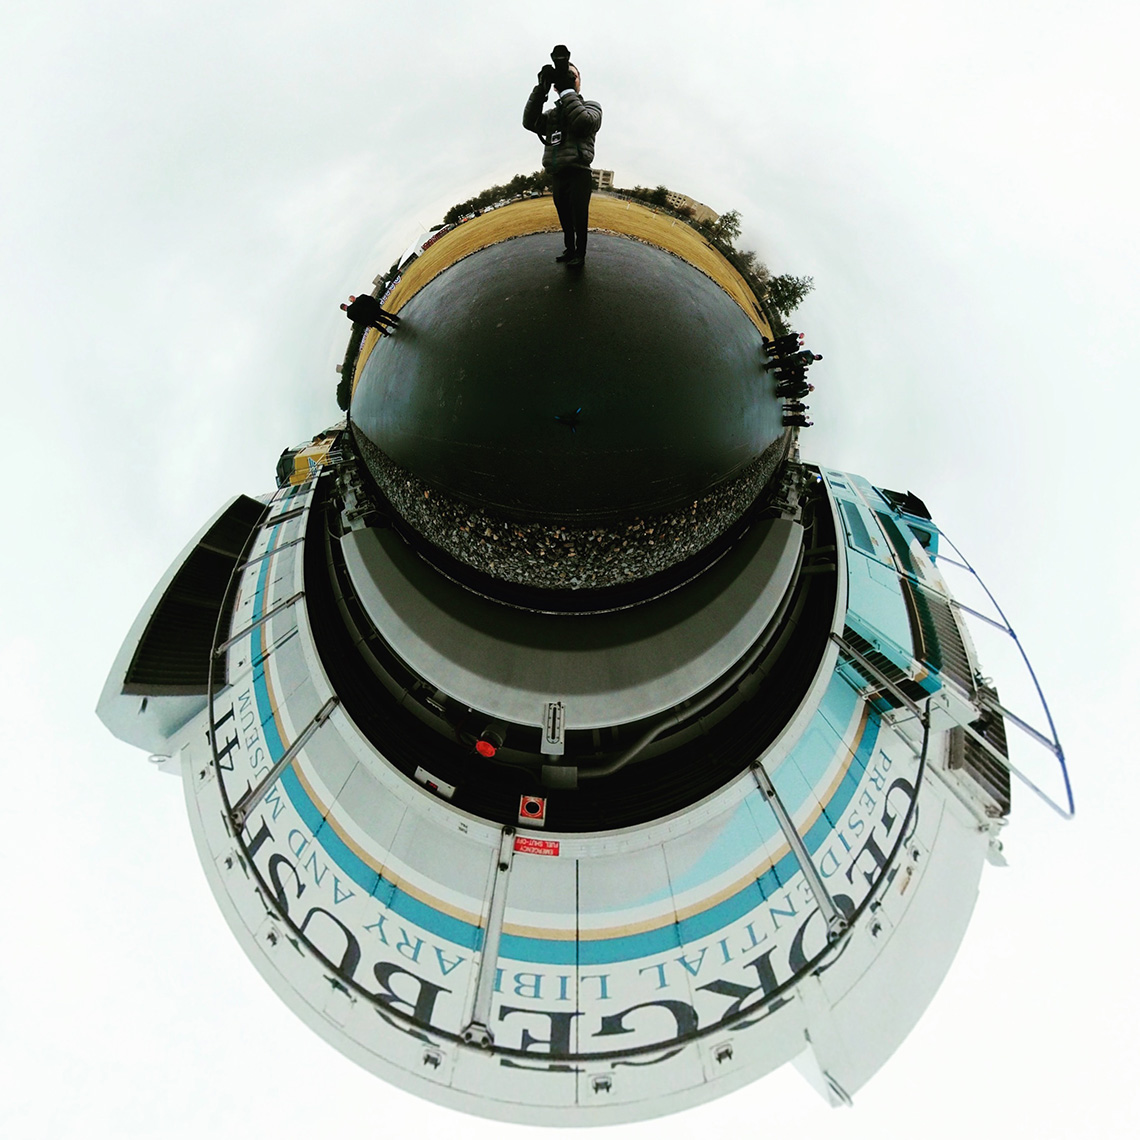 36 0 degree view of UPRR locomotive #4141 at George H. W. Bush funeral at Texas A&M  by Scott Dobry Pictures photographer in Omaha, Nebraska